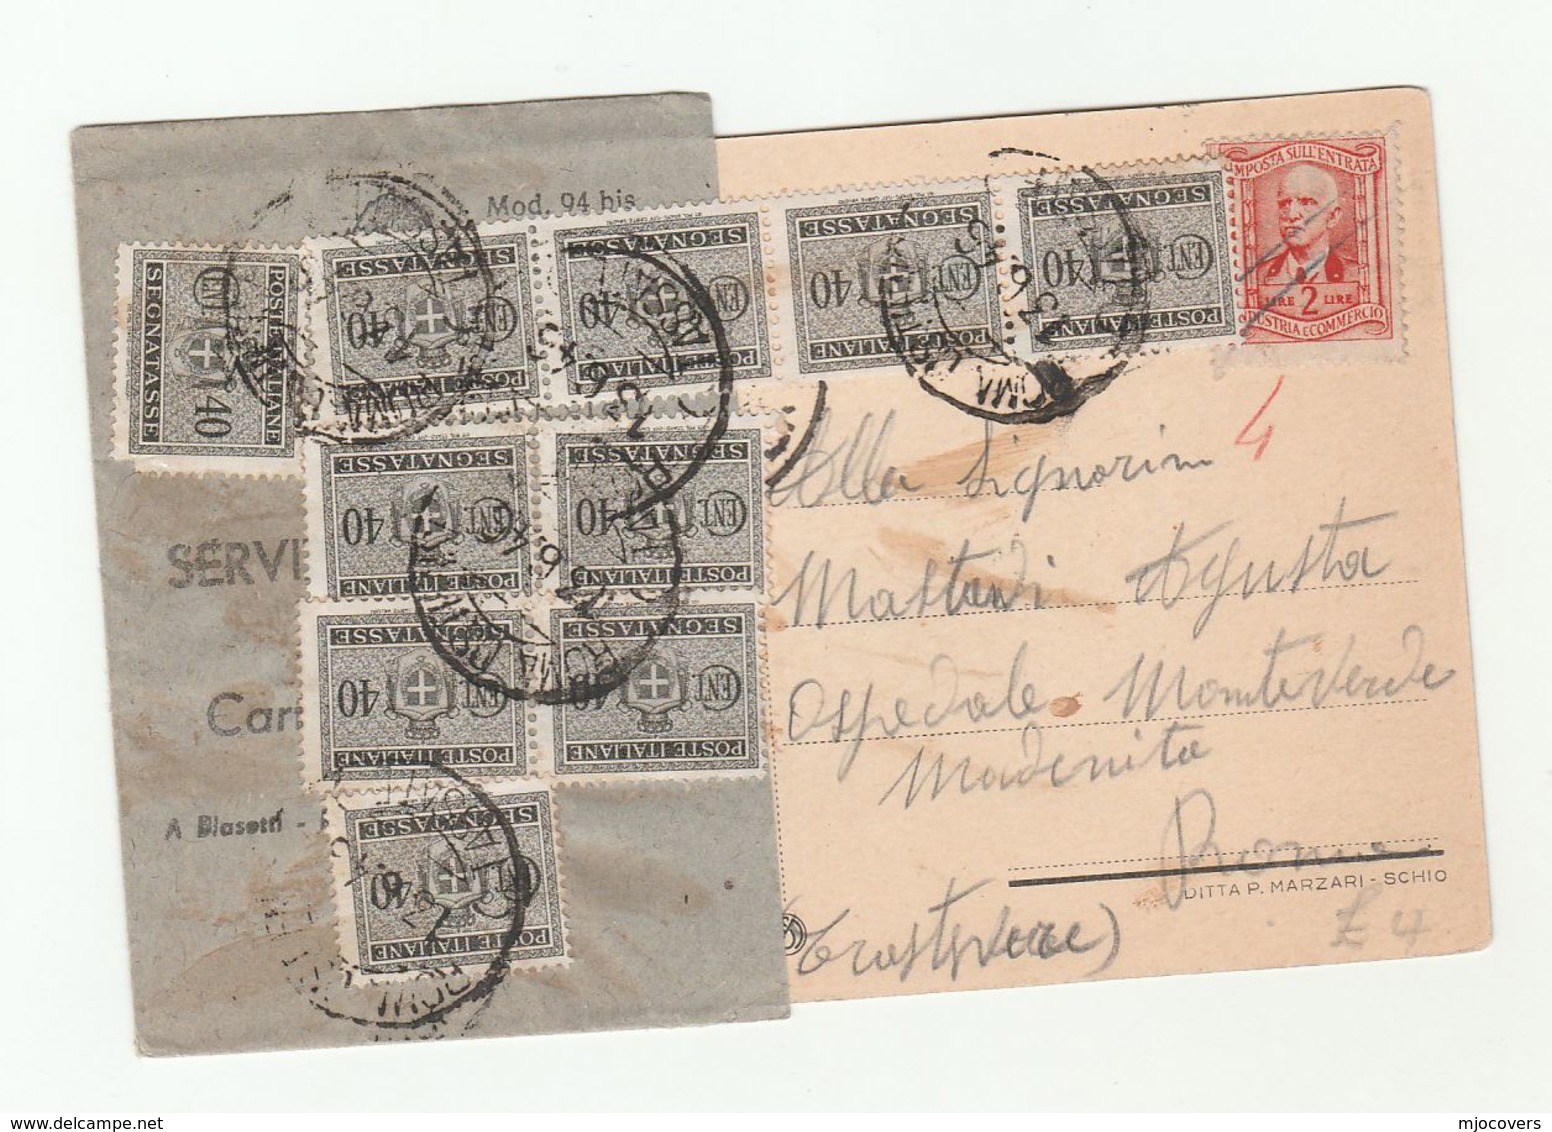 1946 ITALY COVER 10 X 40c SEGNATASSE Postage Due Stamps, 2L Crossed Though Invalid (Postcard Half Covered By Post Label) - 1946-60: Marcophilia